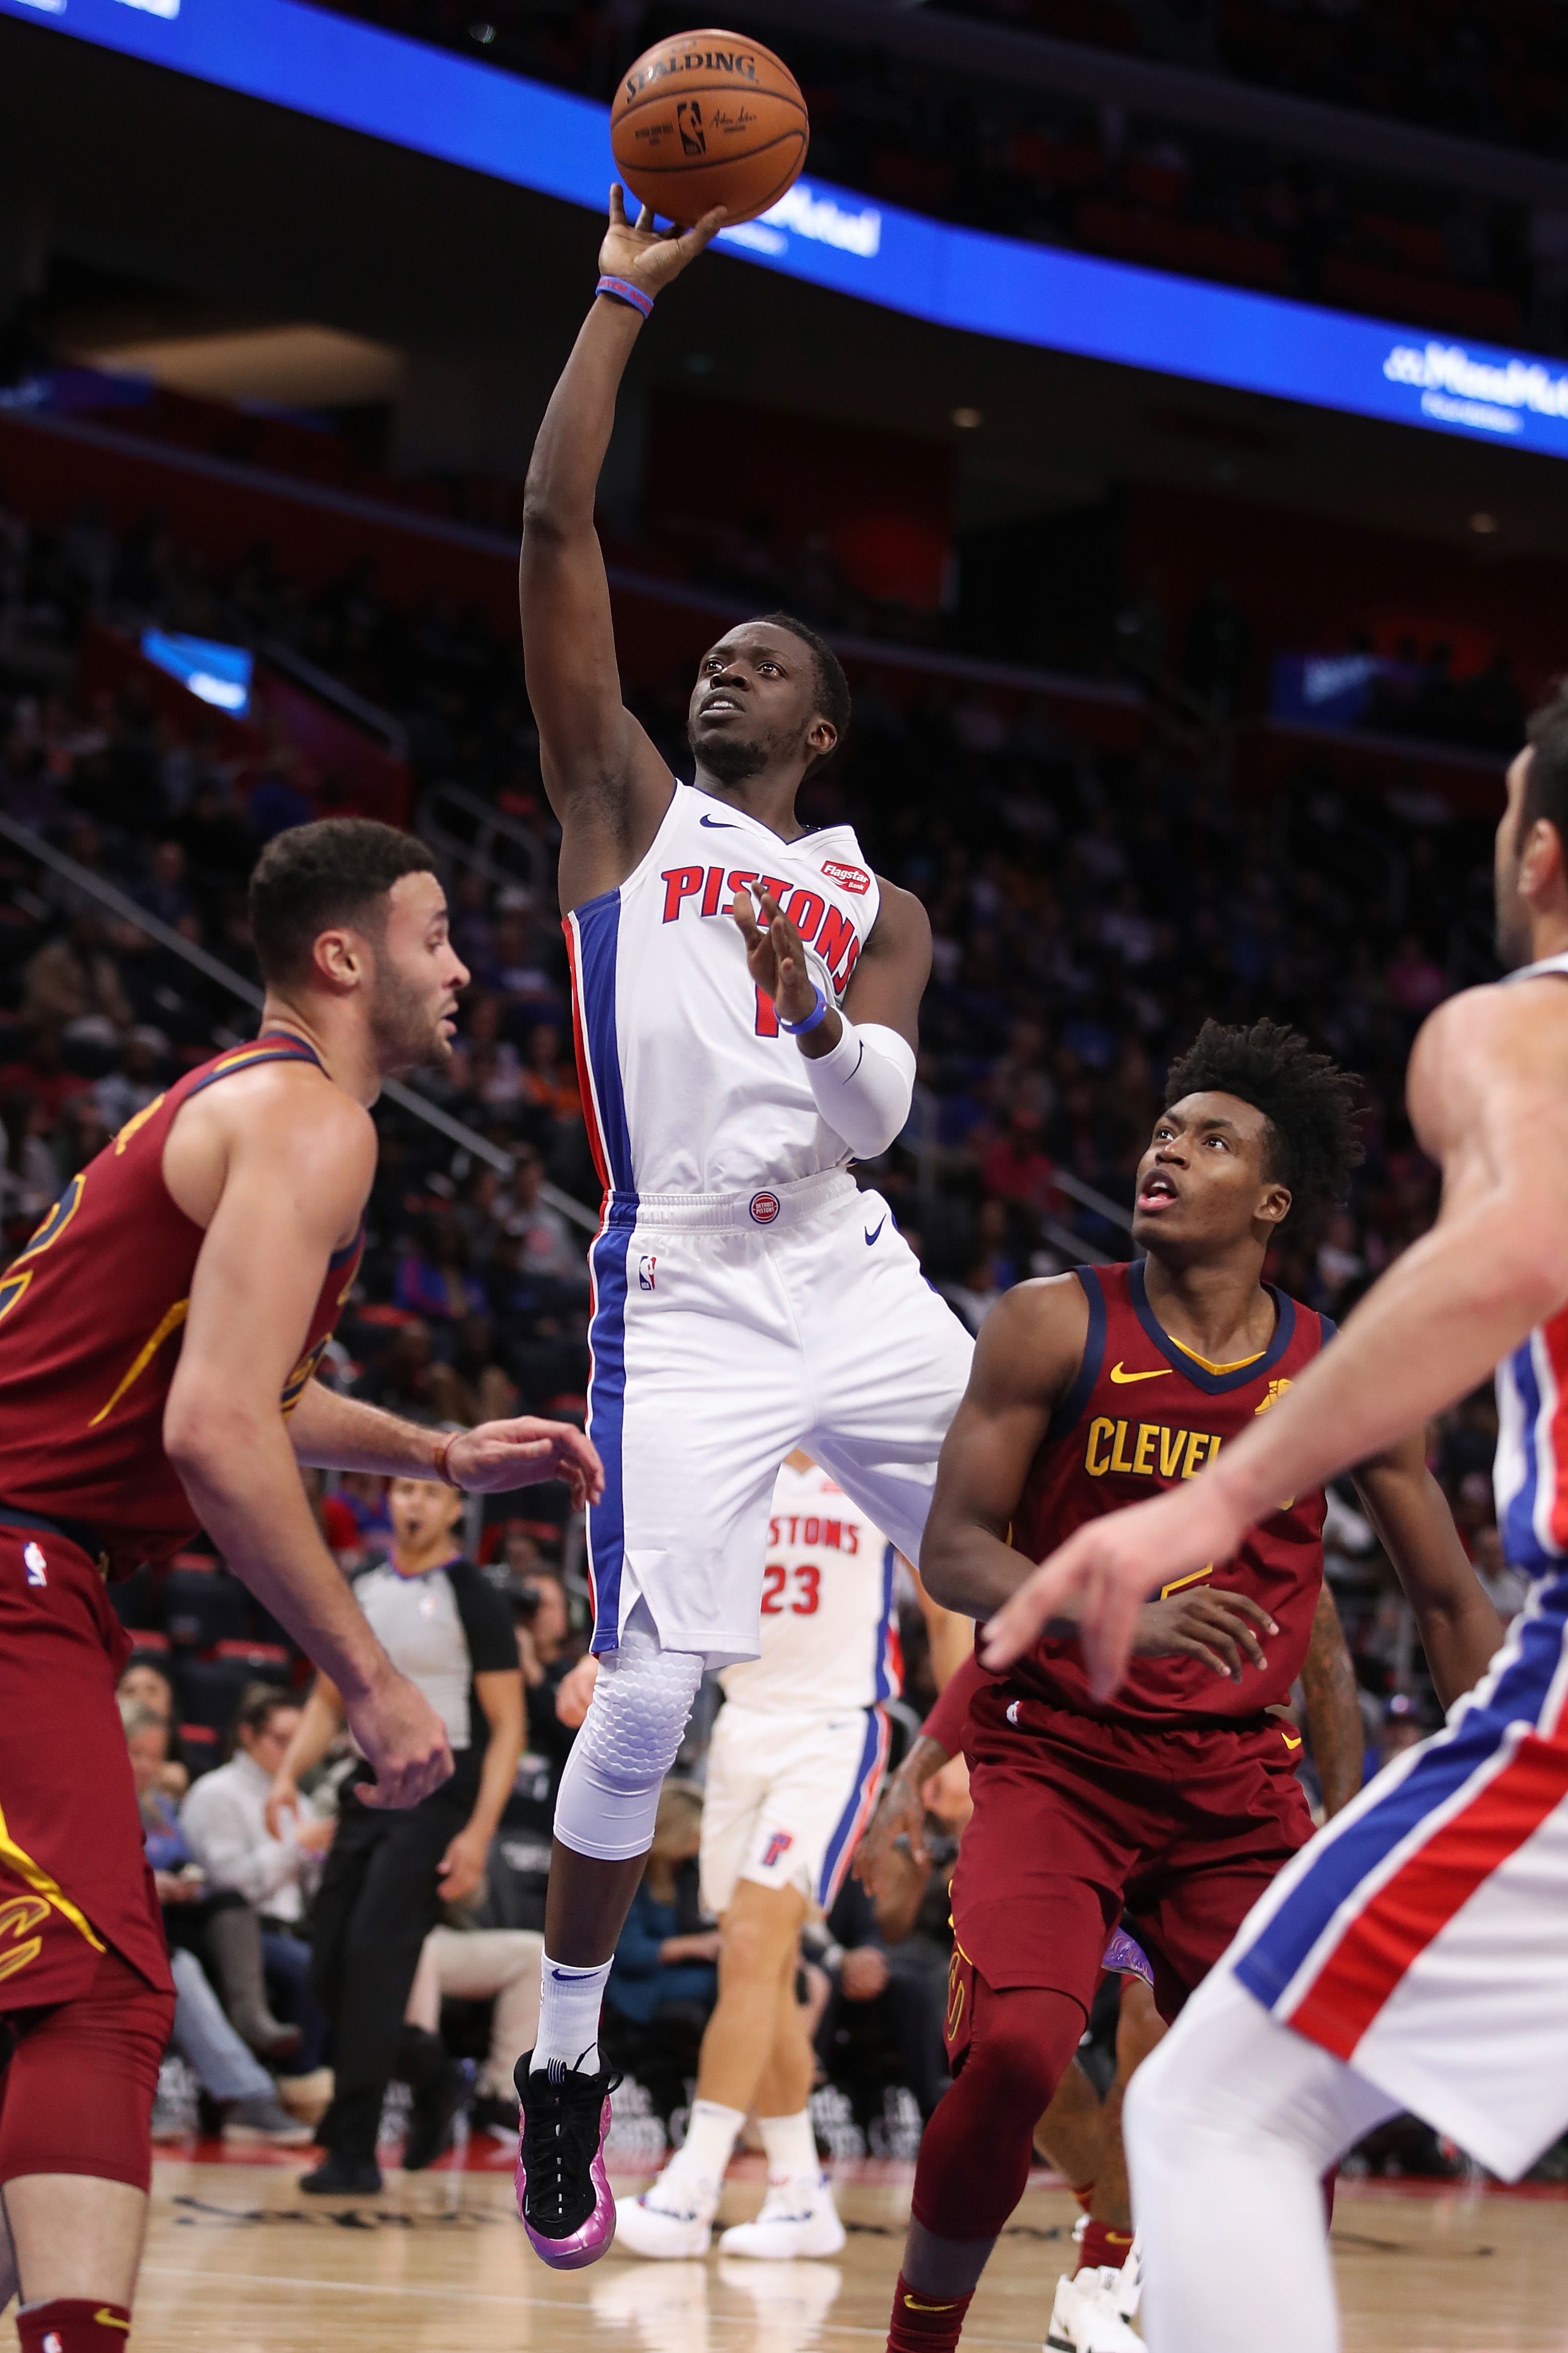 Reggie Jackson (1) of the Detroit Pistons takes a shot in front of Collin Sexton (2) of the Cleveland Cavaliers during the second half.